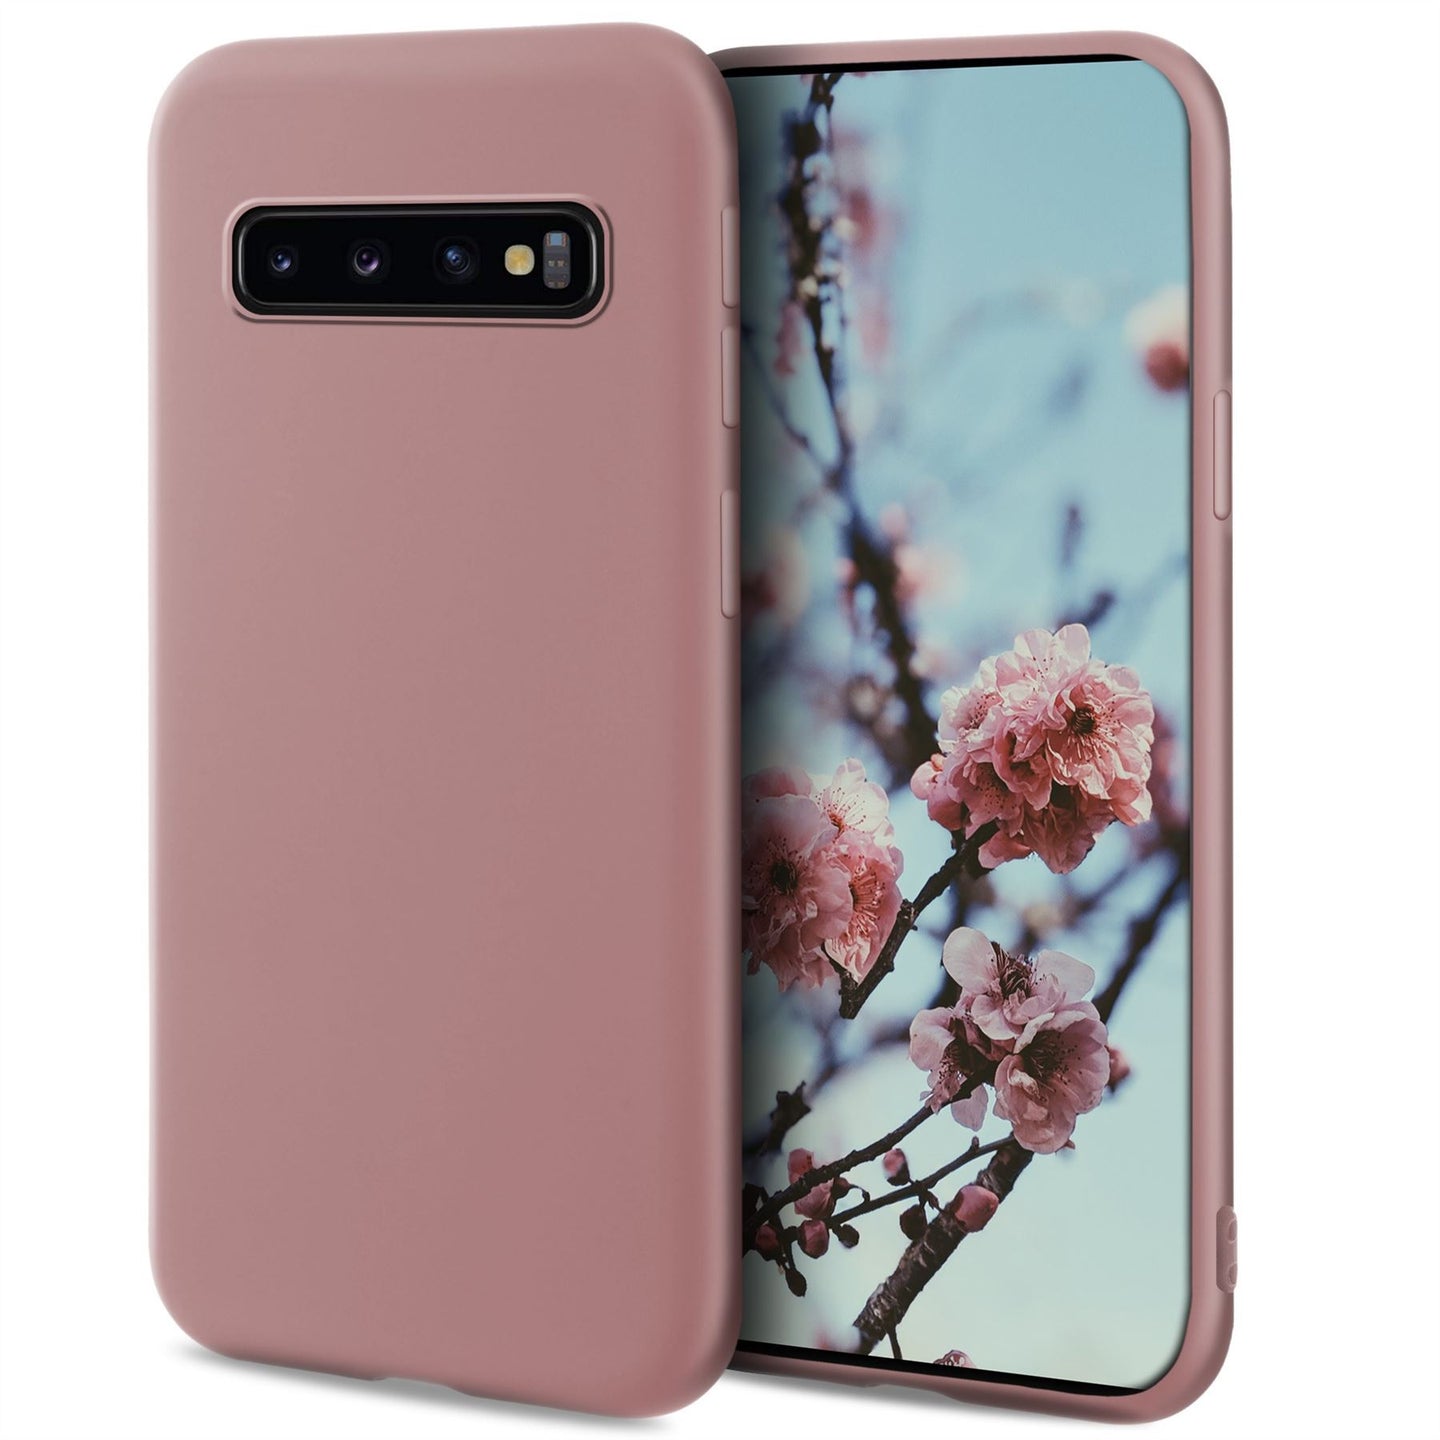 Moozy Minimalist Series Silicone Case for Samsung S10, Rose Beige - Matte Finish Slim Soft TPU Cover